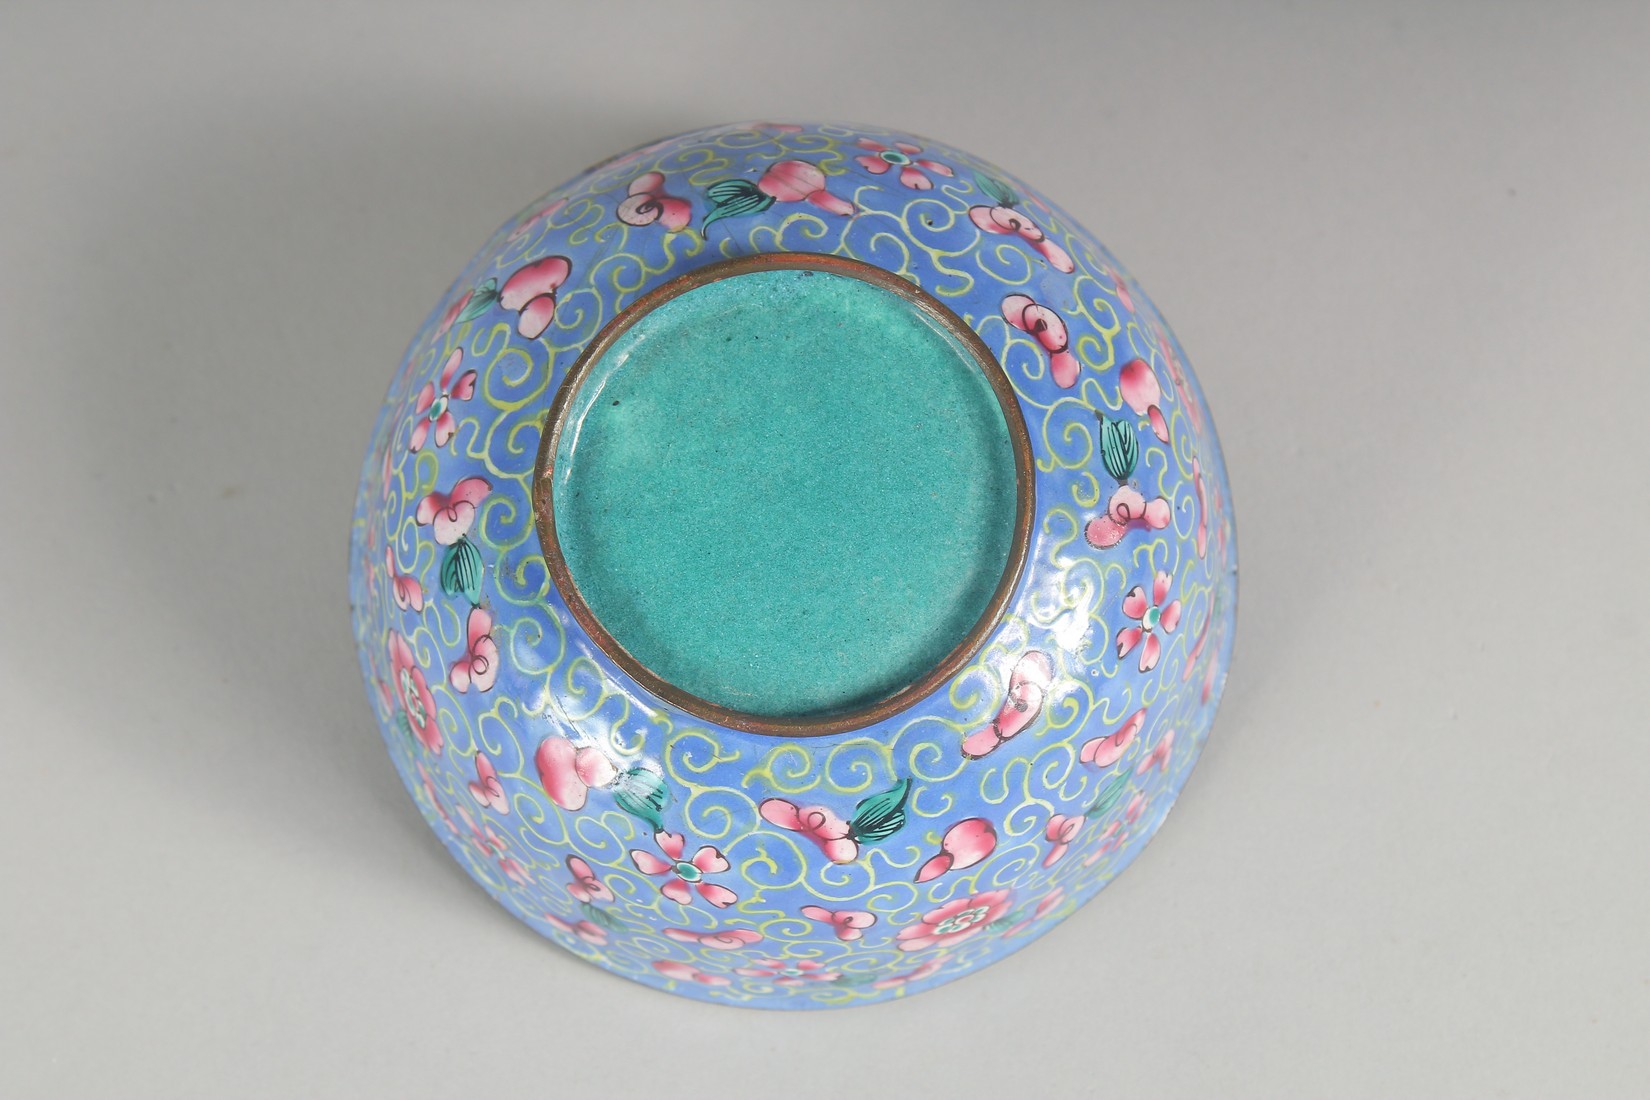 A CHINESE CANTON FAMILLE ROSE ENAMEL BOWL, the exterior with foliate decoration, 11.5cm diameter. - Image 5 of 5